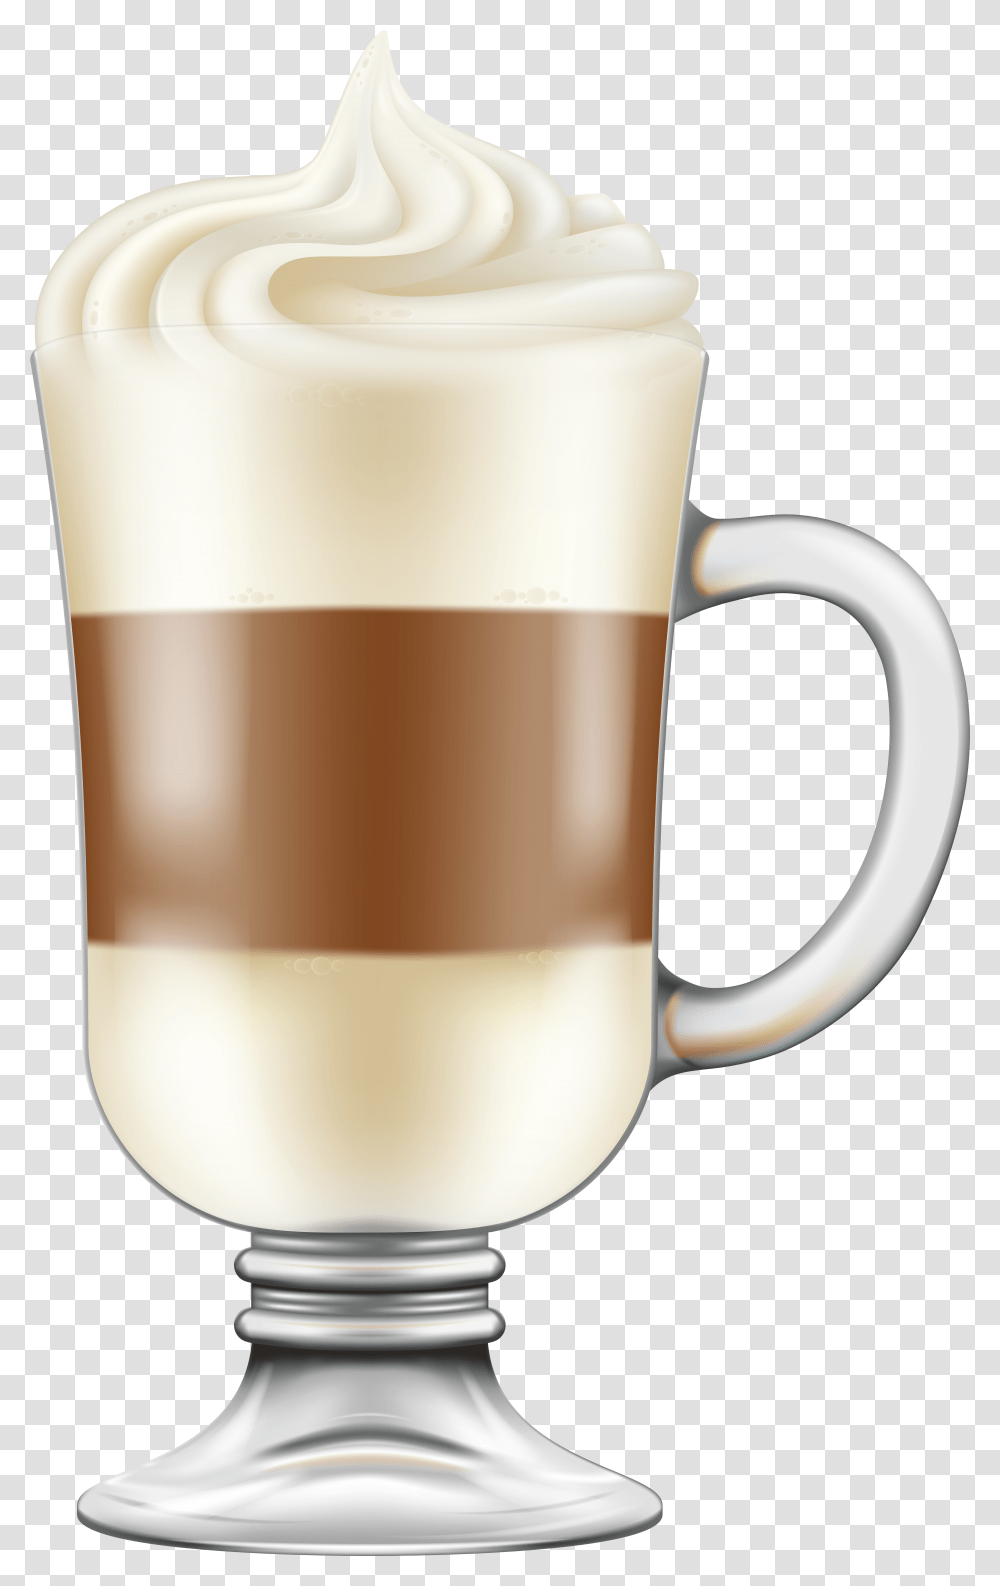 Cappuccino Clip Art Image Coffee Clipart Cappuccino Background Transparent Png